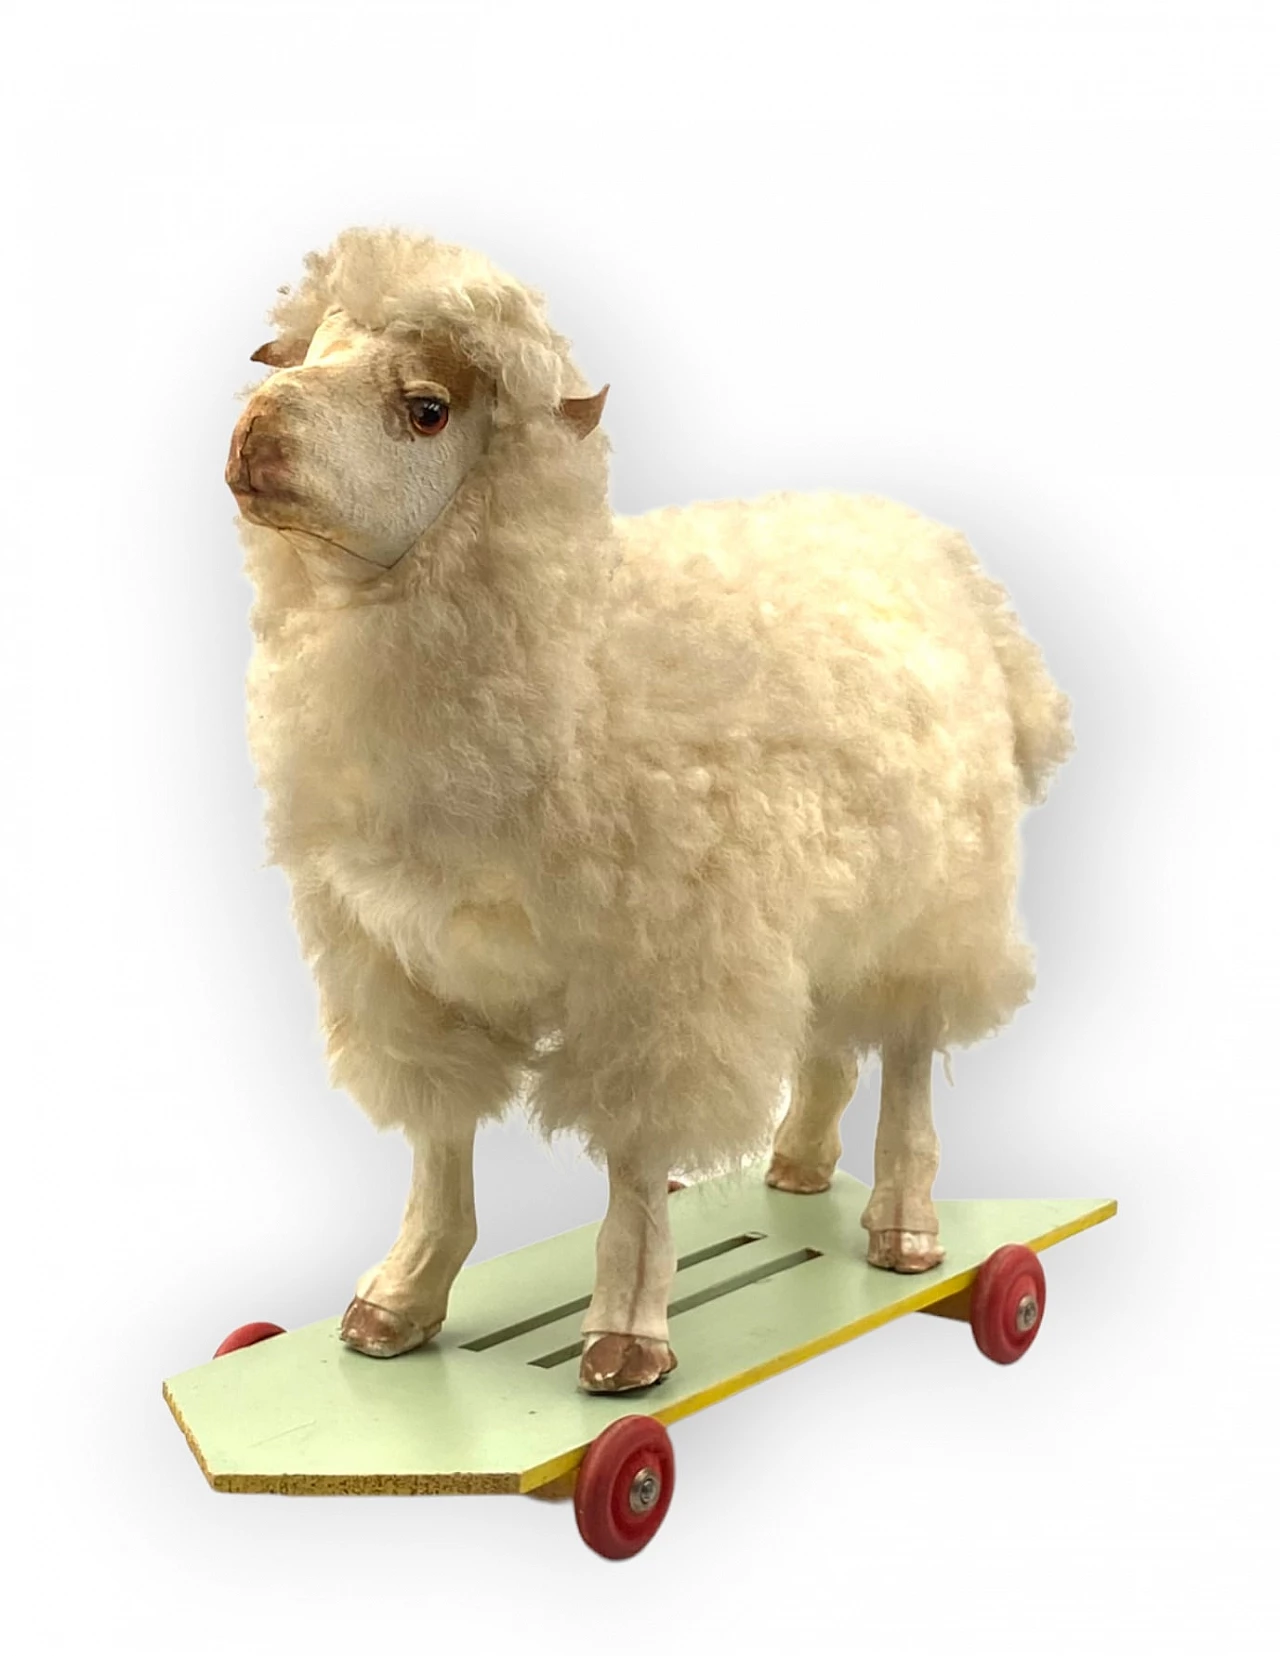 Wool and wood toy sheep with wheels 10